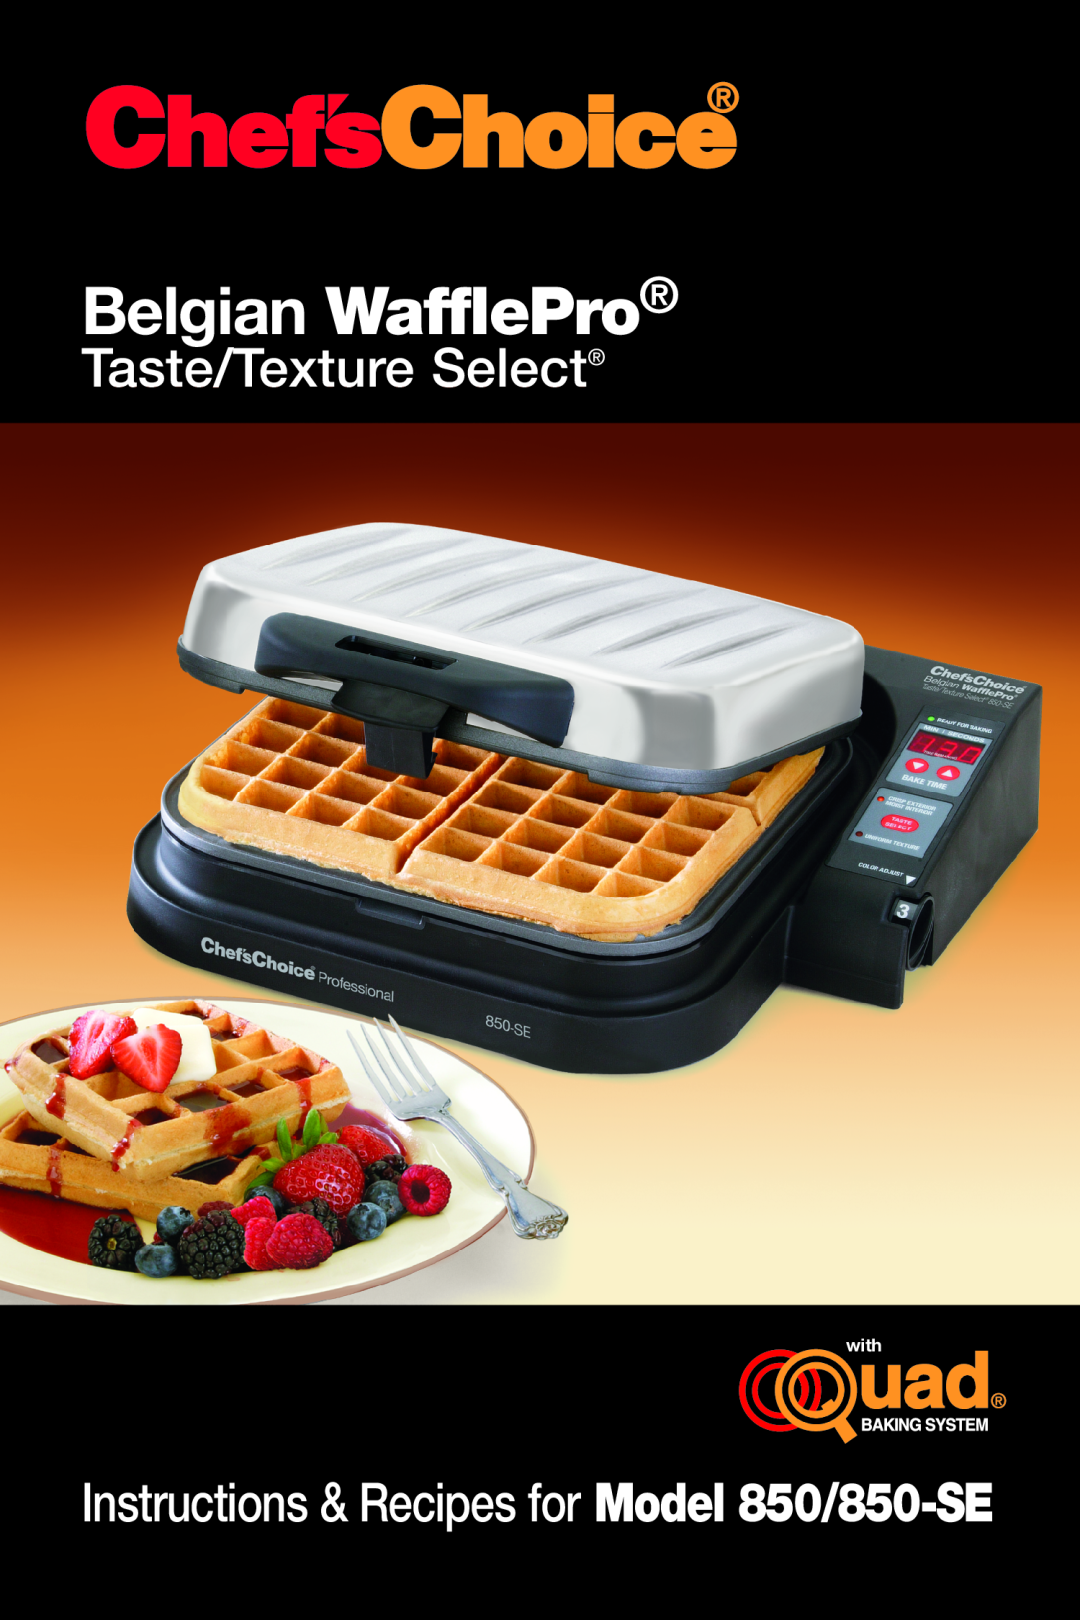 Chef's Choice 840B manual Belgian WafflePro, Taste/Texture Select, Instructions & Recipes for Model 850/850-SE, with 